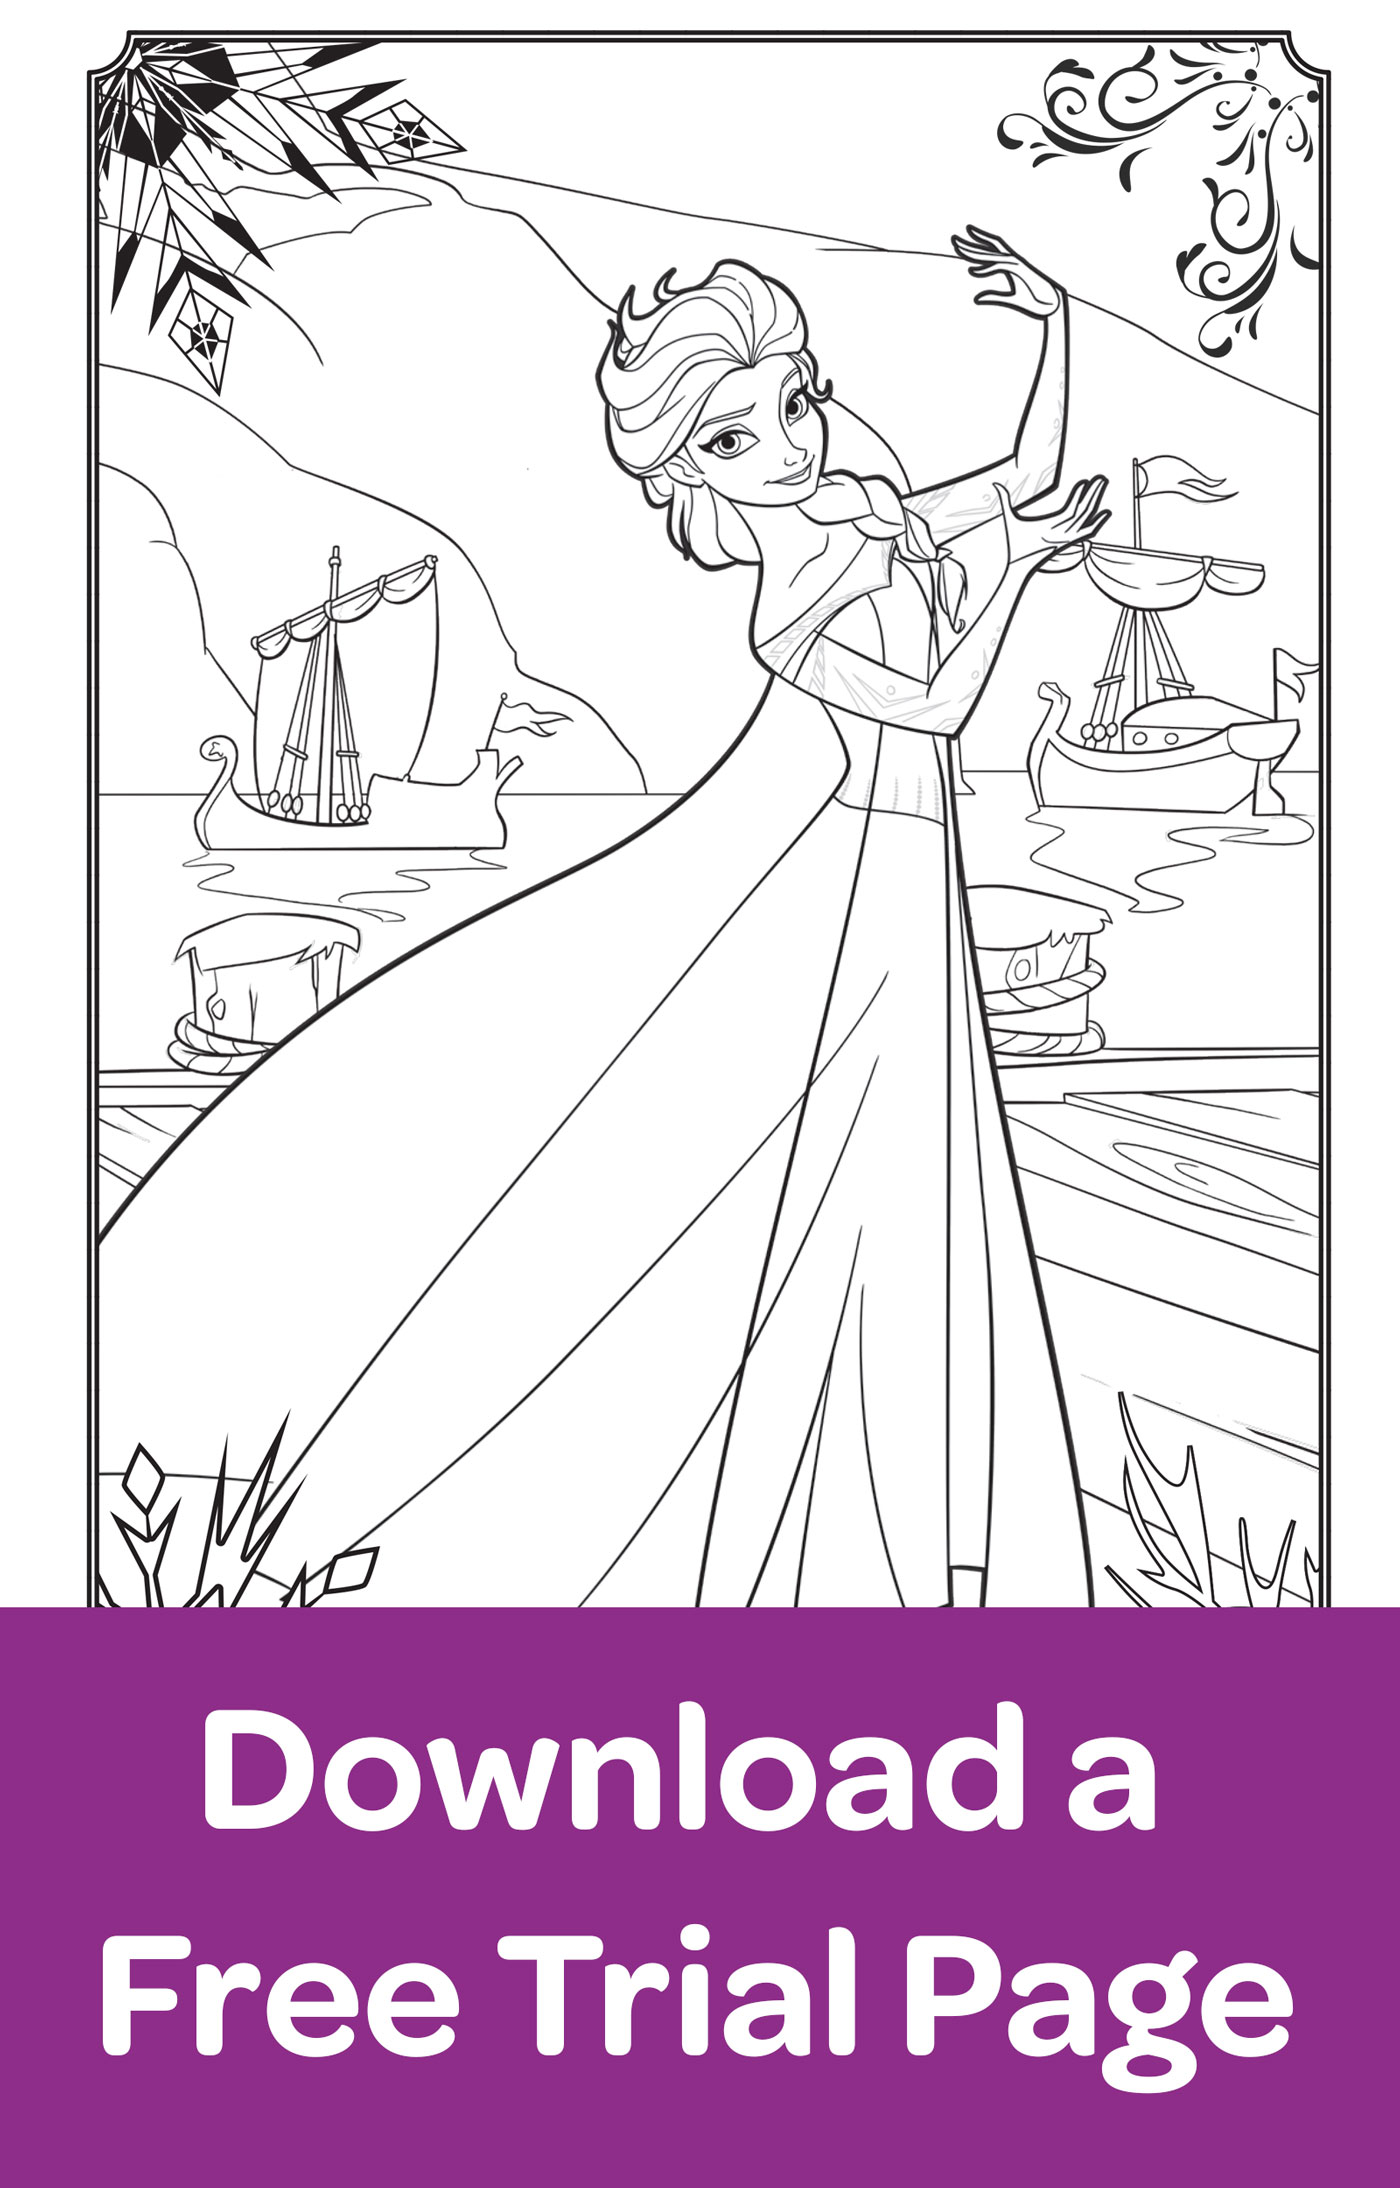 Crayola Color Alive Interactive Coloring Pages Download Free Trial Page